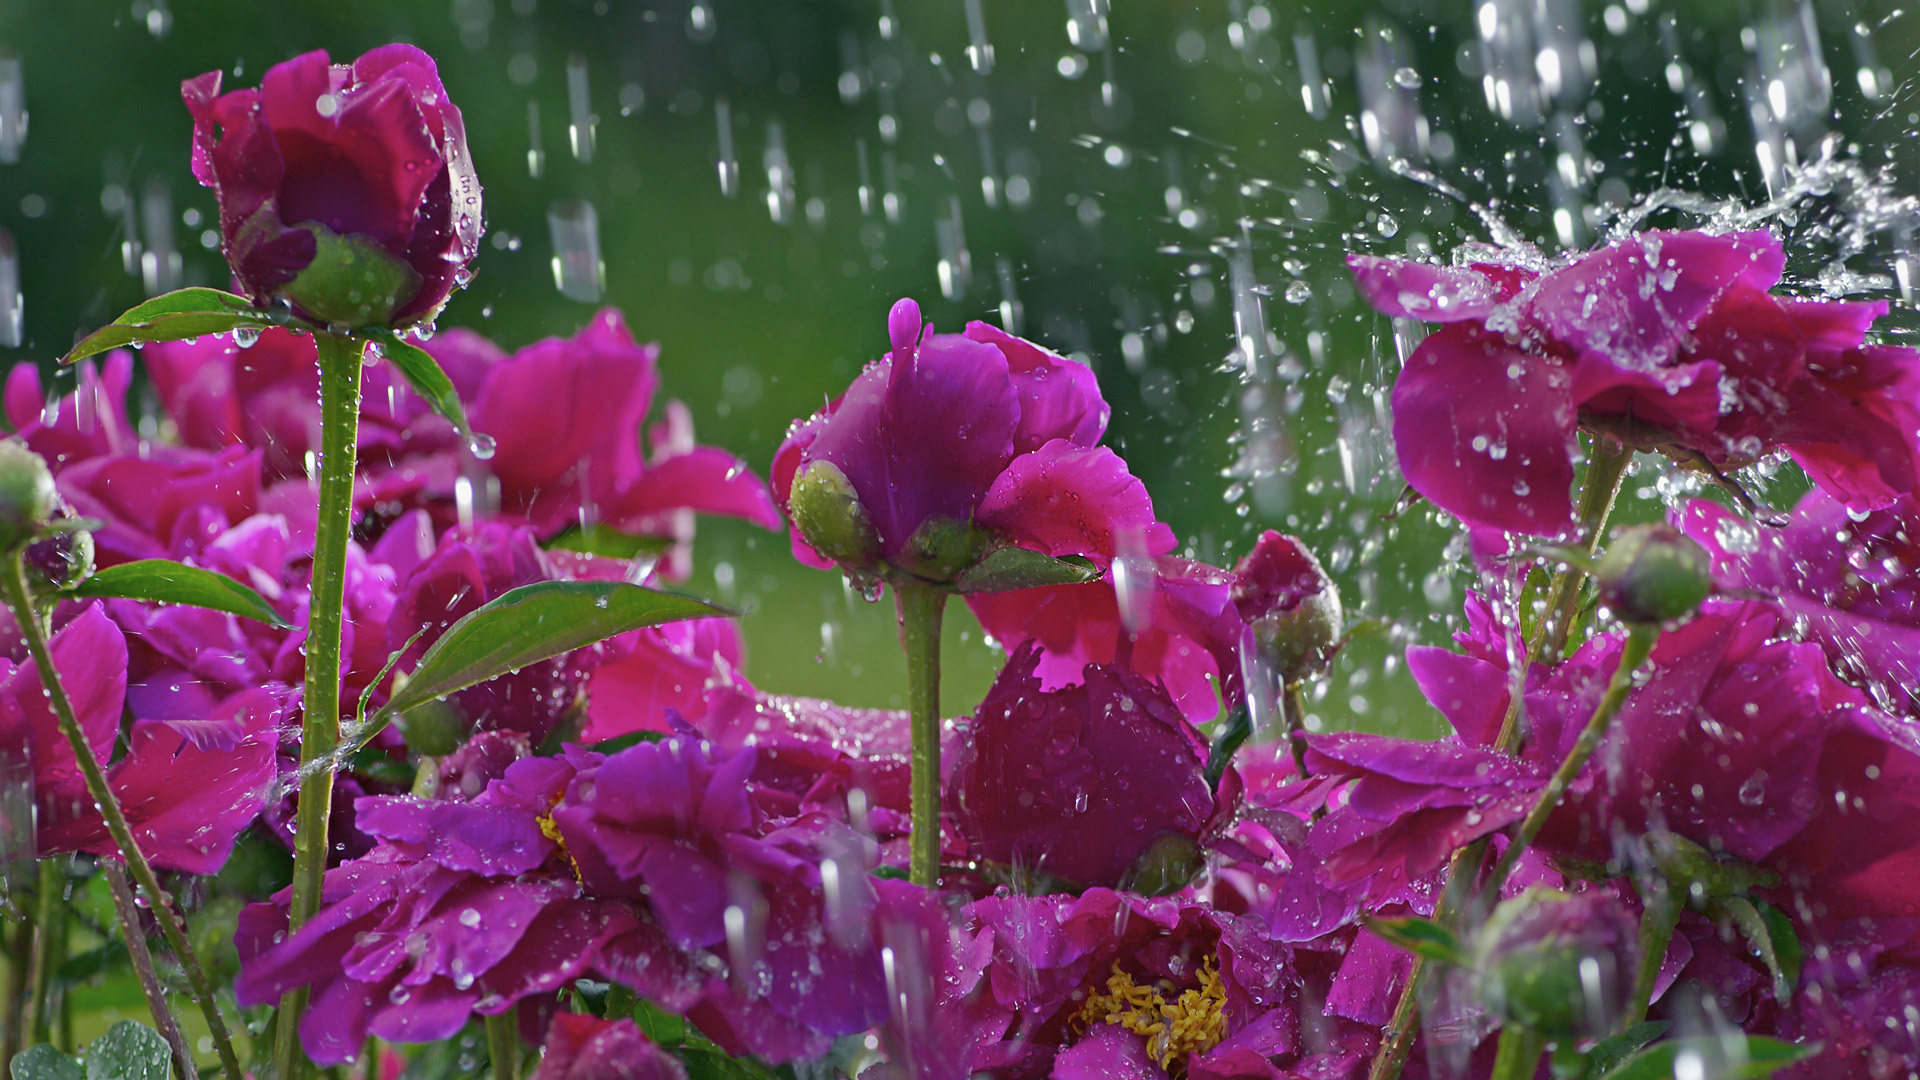 Purple rose under the rain wallpapers and images - wallpapers ...